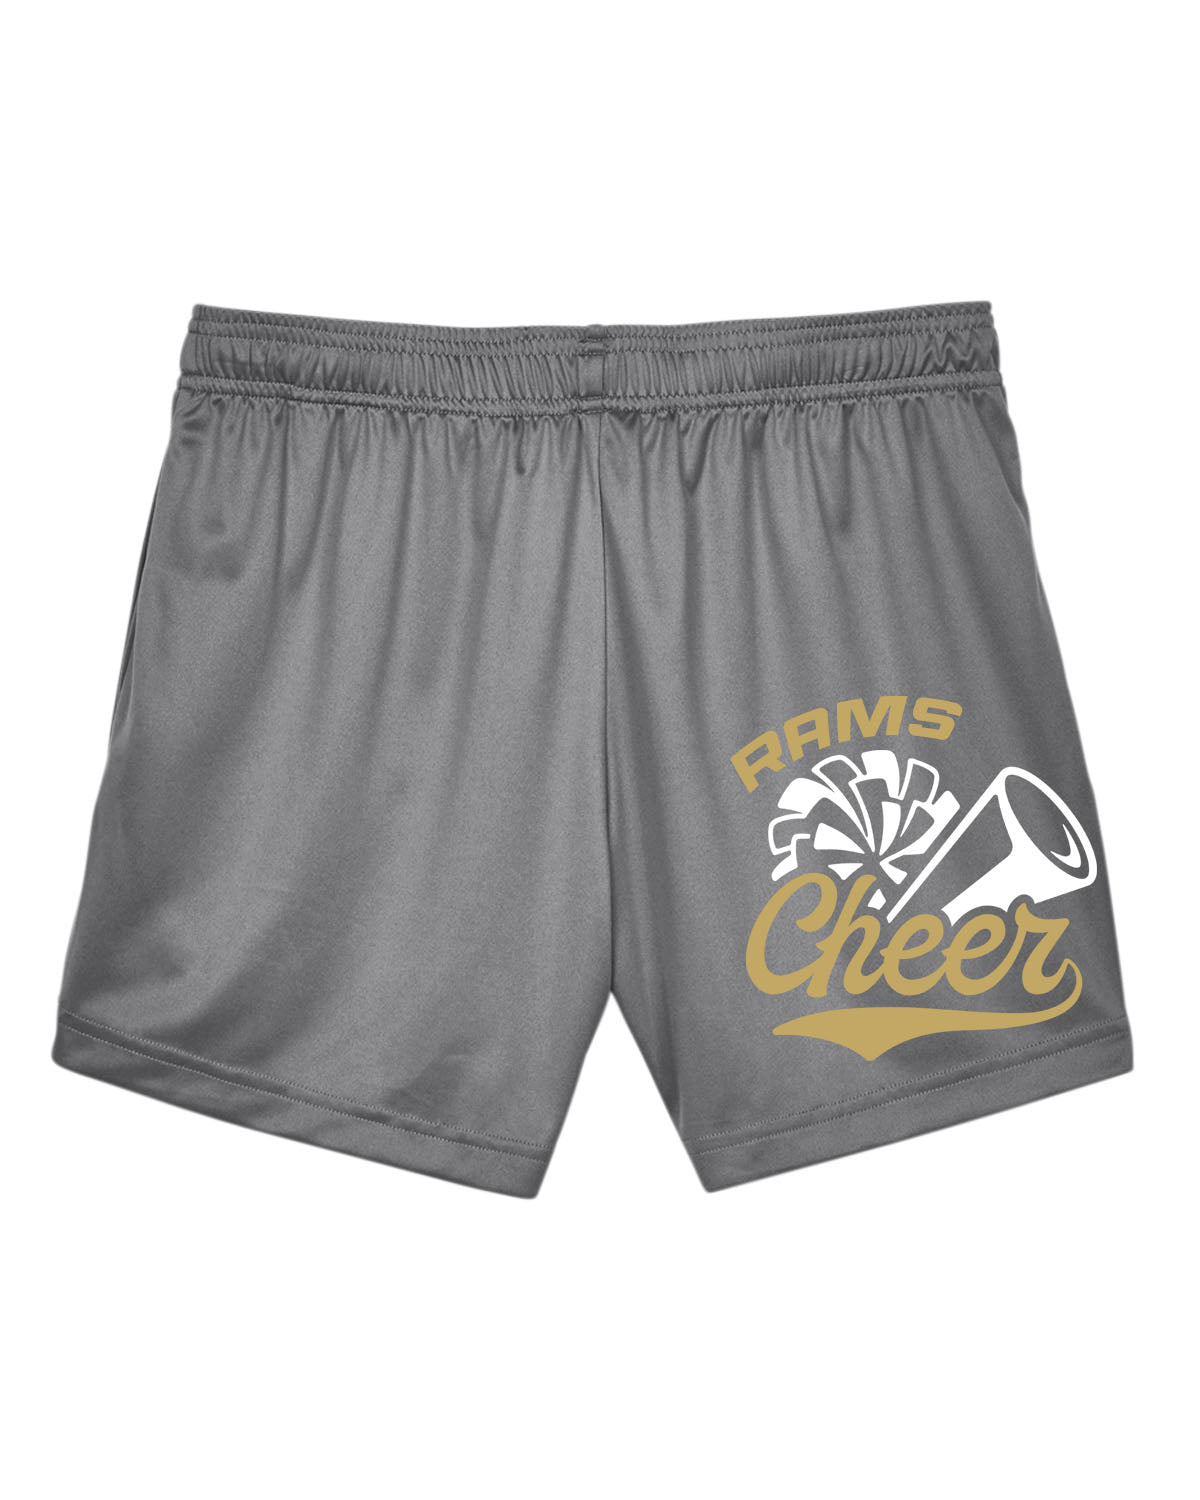 Sussex Middle Cheer Ladies Performance Design 1 Shorts